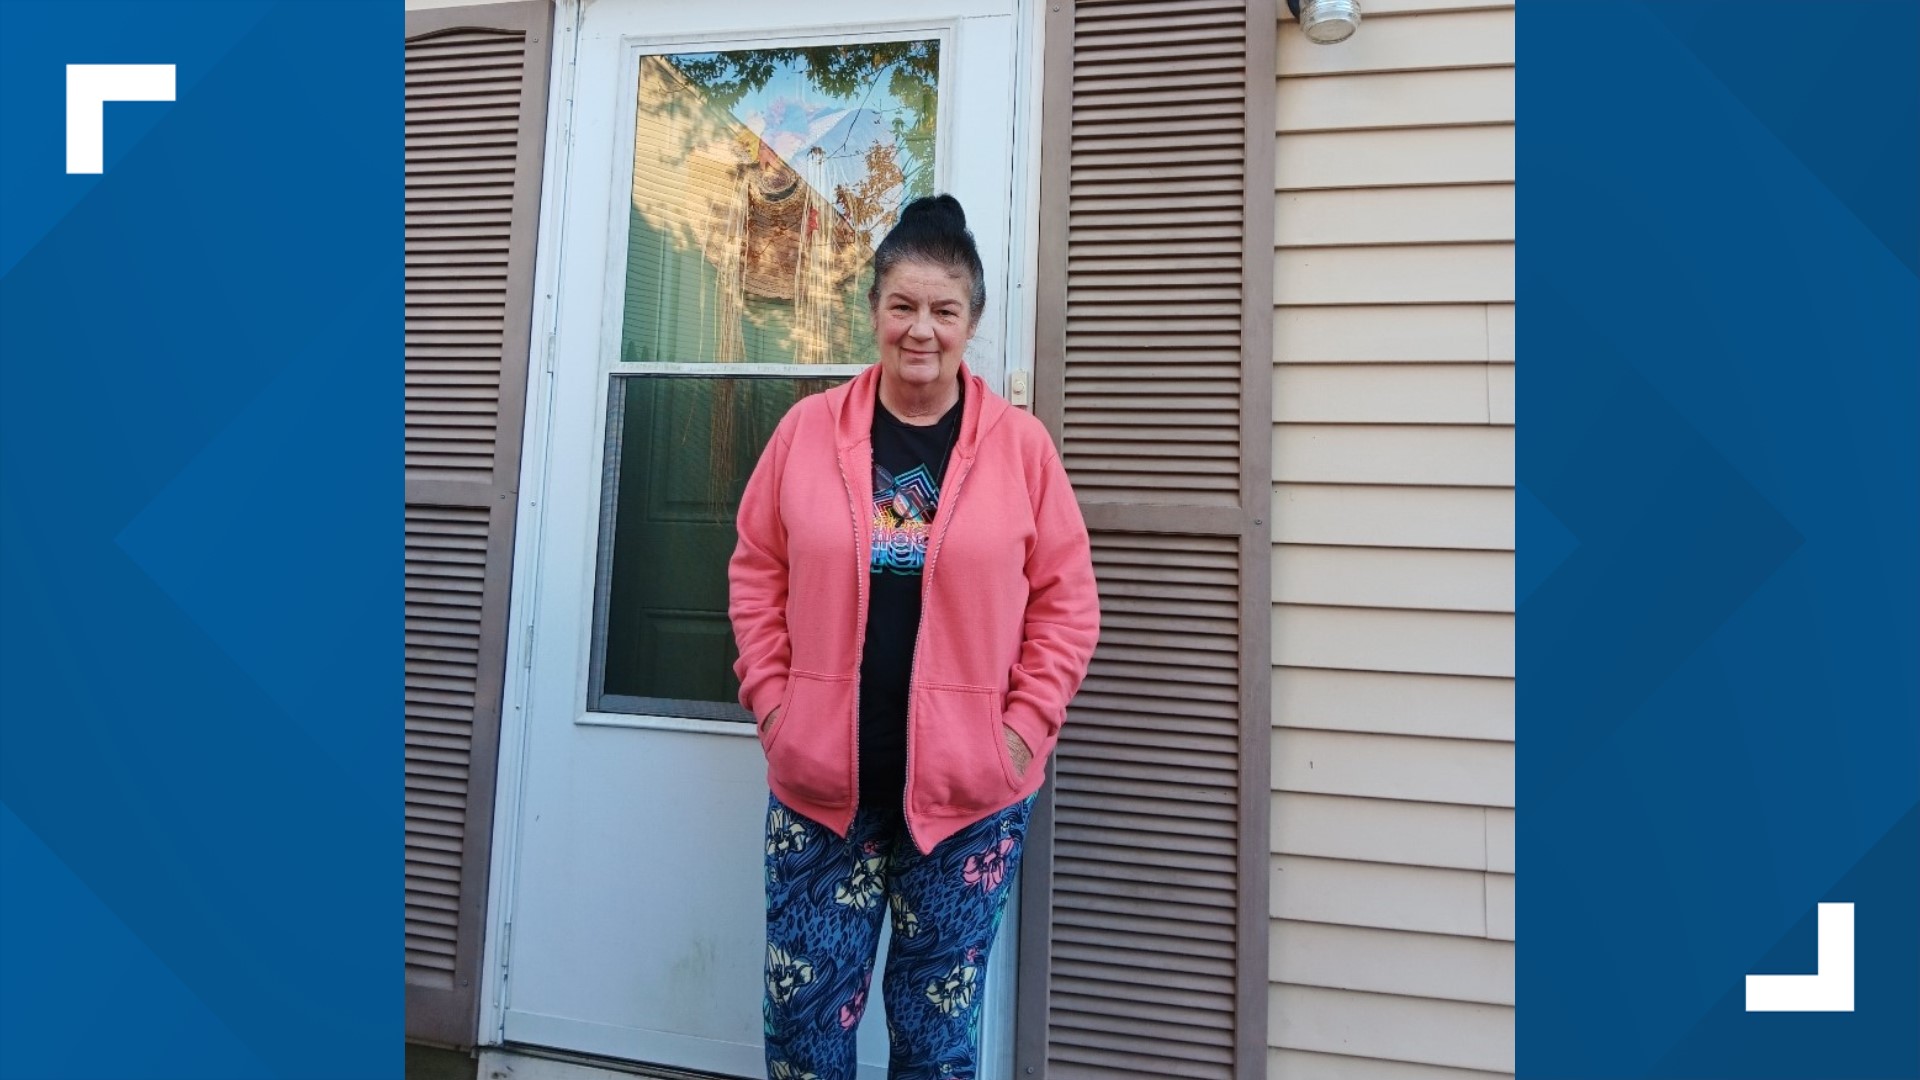 Deborah McAndrews never thought she would experience homelessness until her apartment became uninhabitable and she was forced to live out of her car.